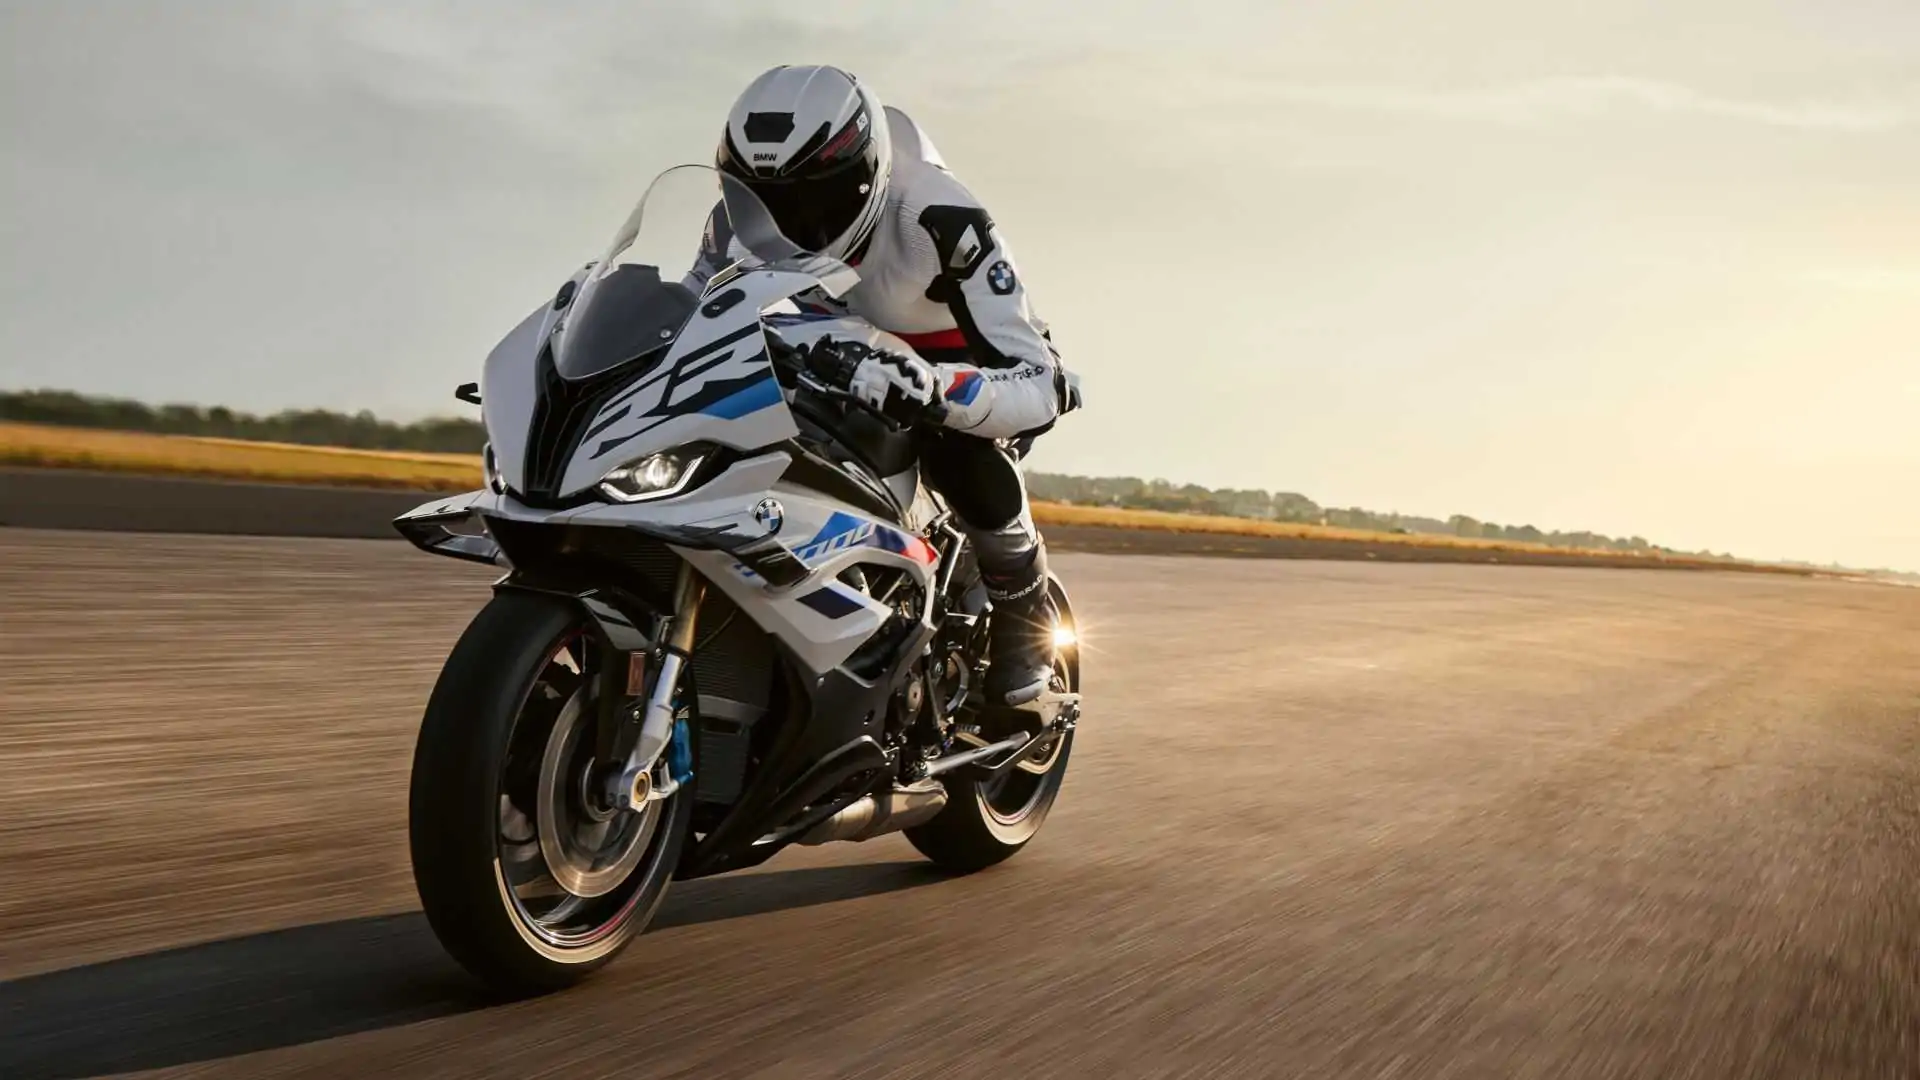 Revolution on the racetrack: active motorcycle aerodynamics from BMW!